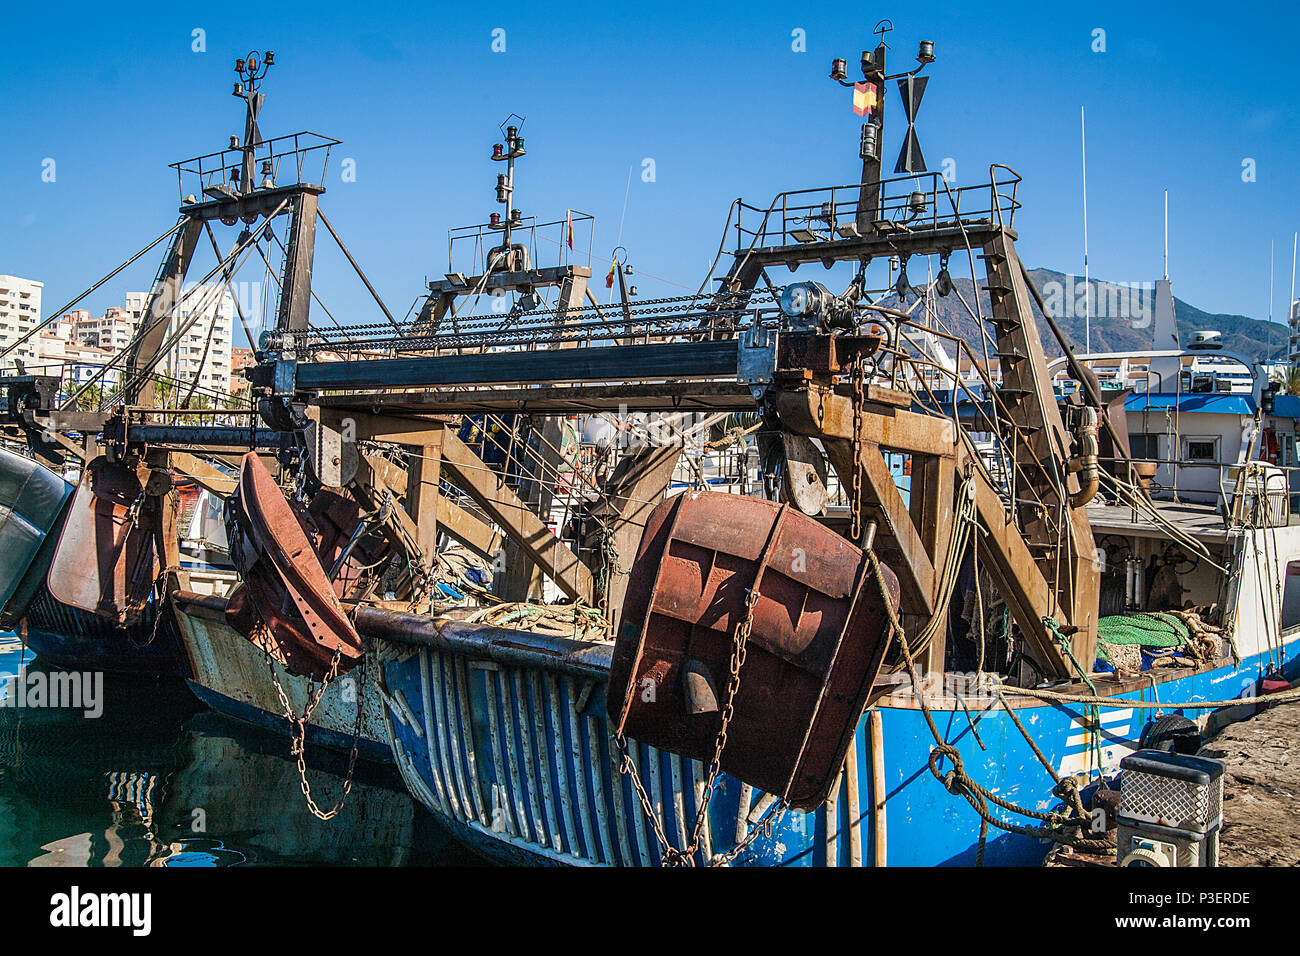 fishing trawler superstructure, Stock Photo